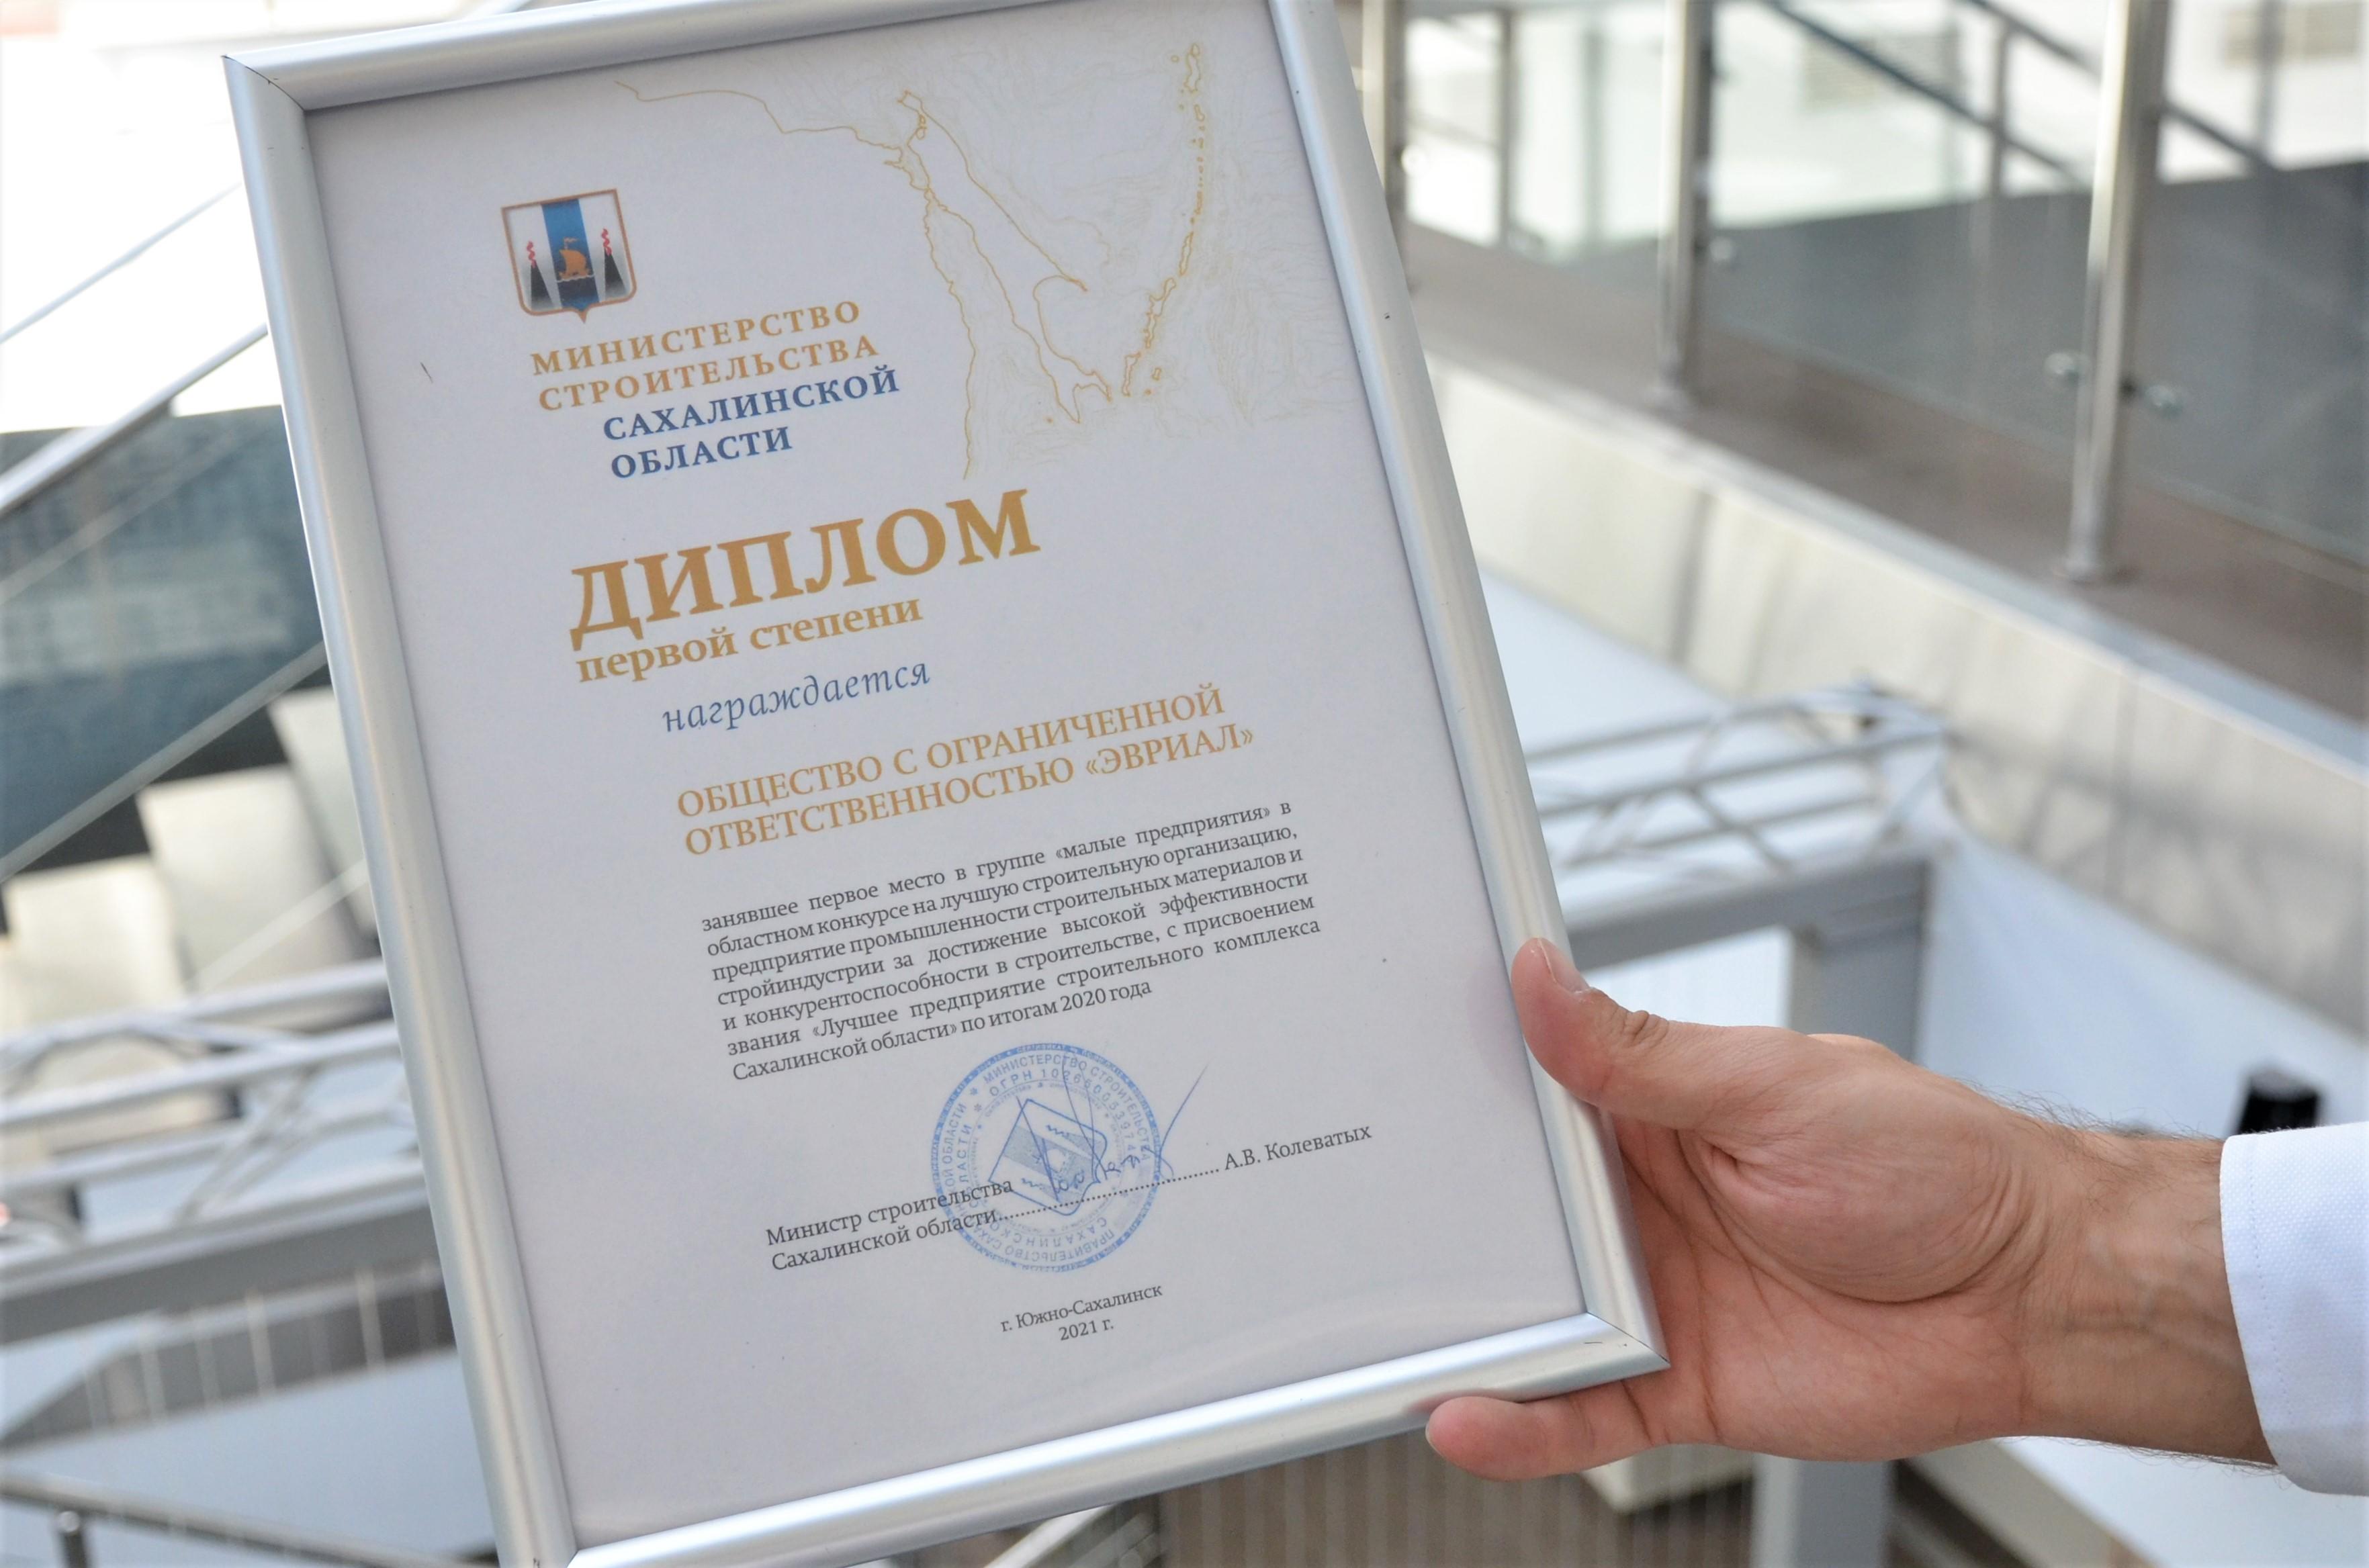 A separate division of the Avrial Group of Companies in Sakhalin became the winner of the regional competition as the best construction organization.